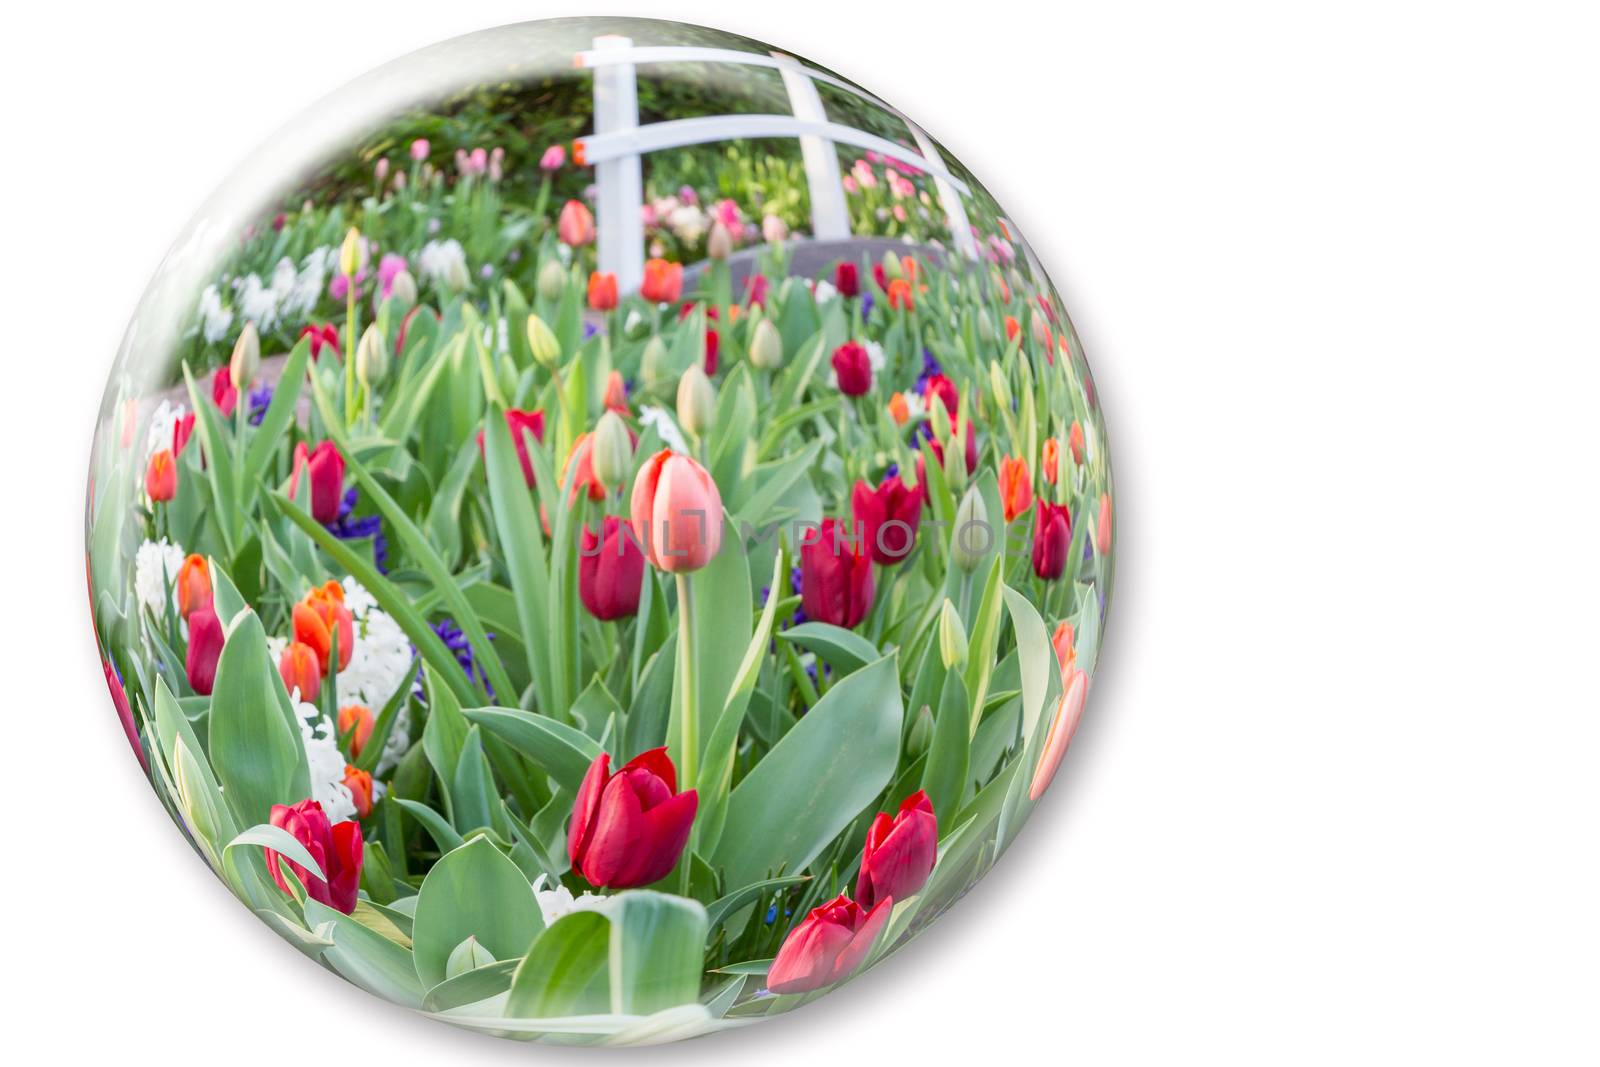 Glass sphere reflecting red tulips flowers by BenSchonewille